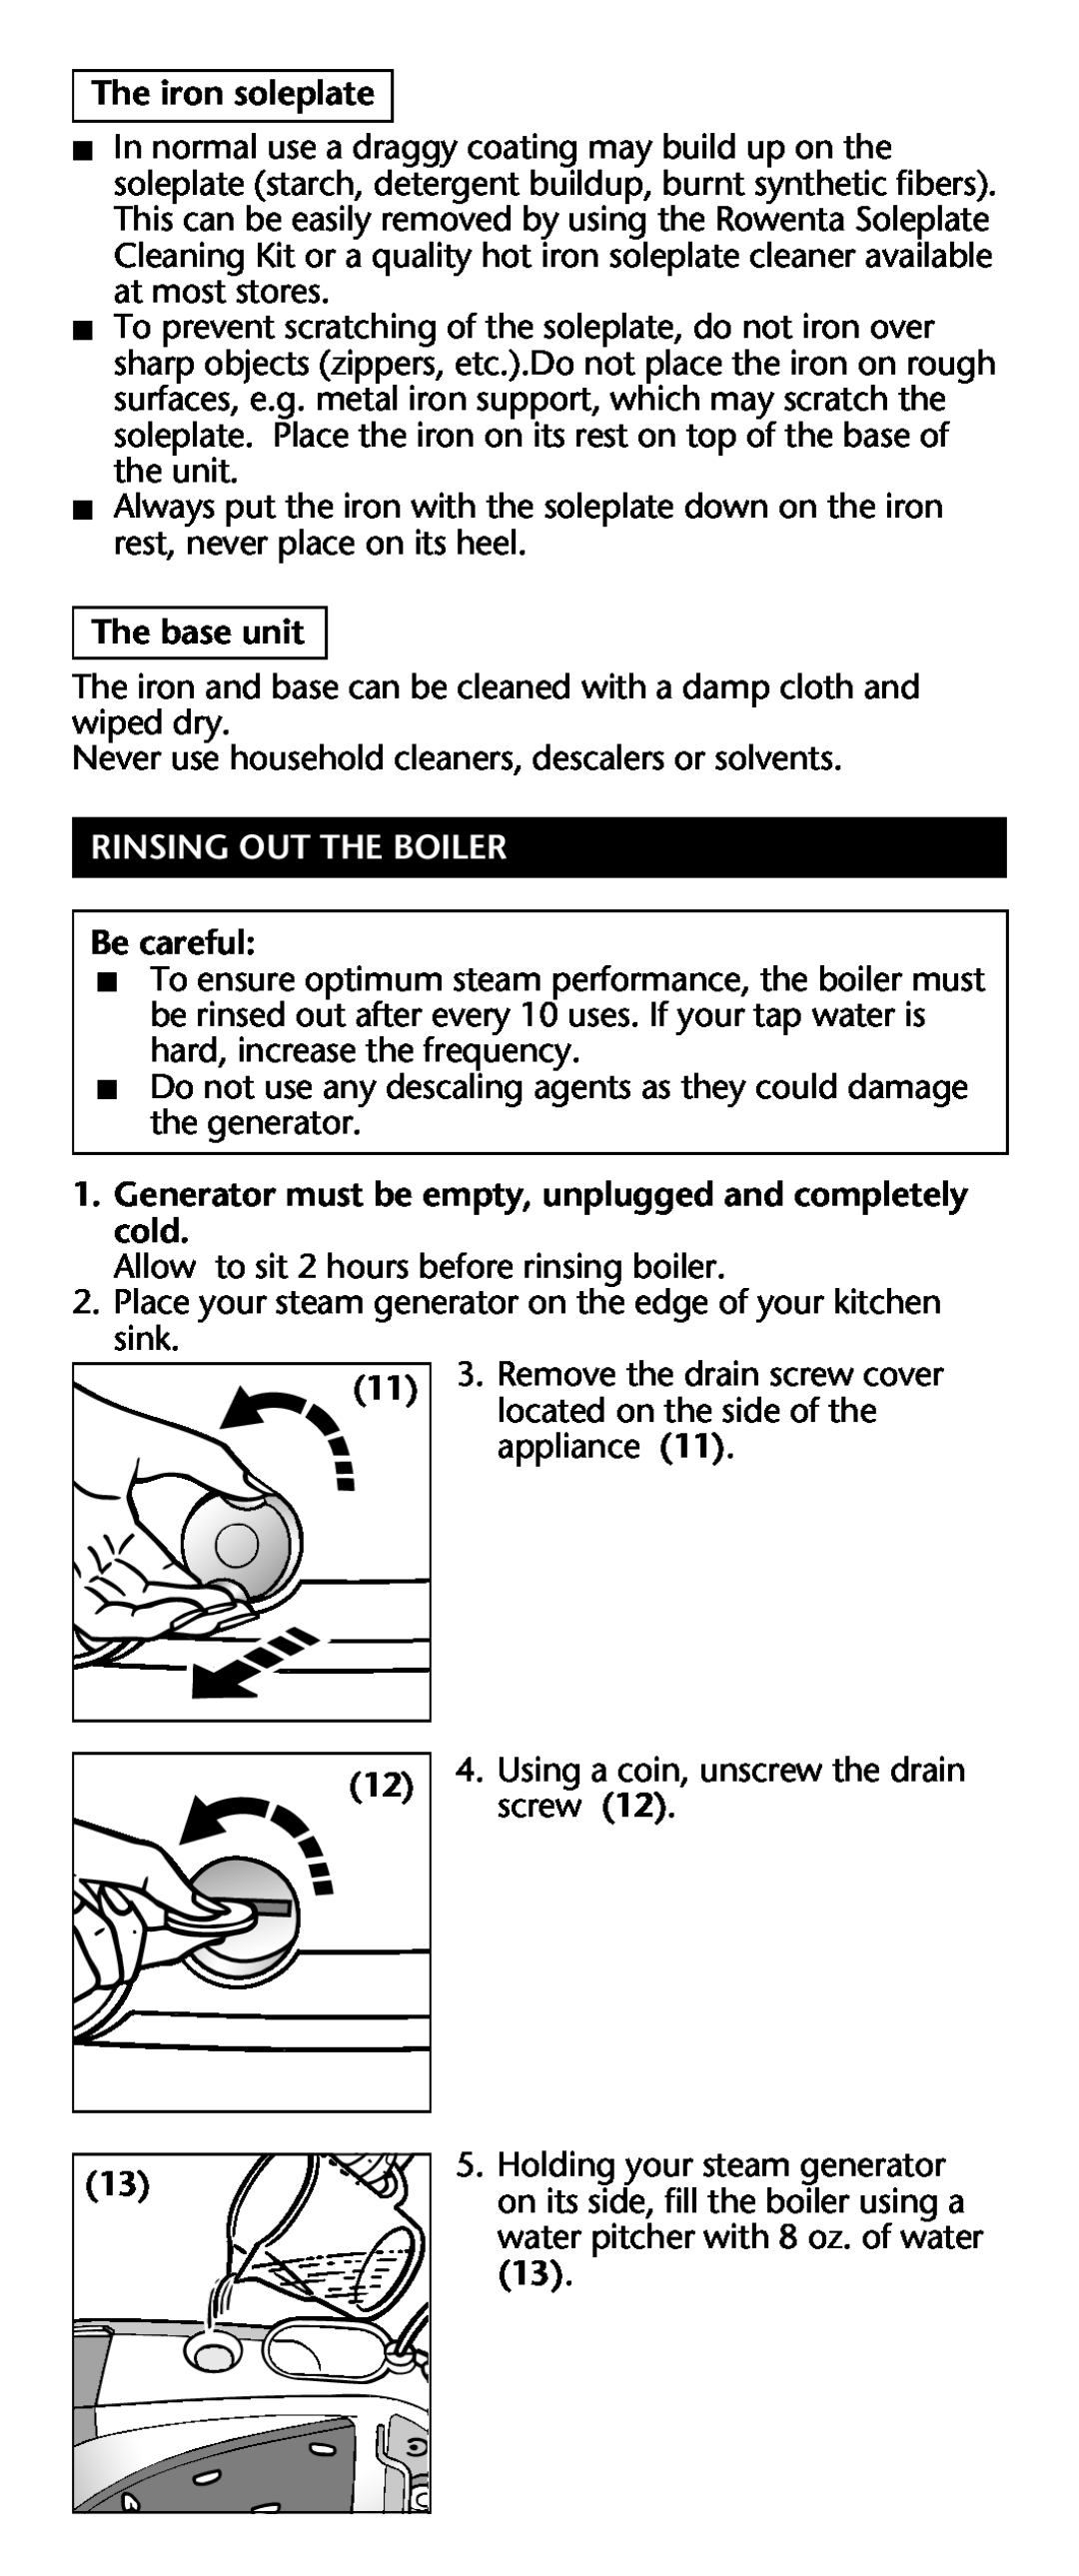 Rowenta Werke manual The iron soleplate, The base unitÊ, Rinsing Out The Boiler, Be careful 